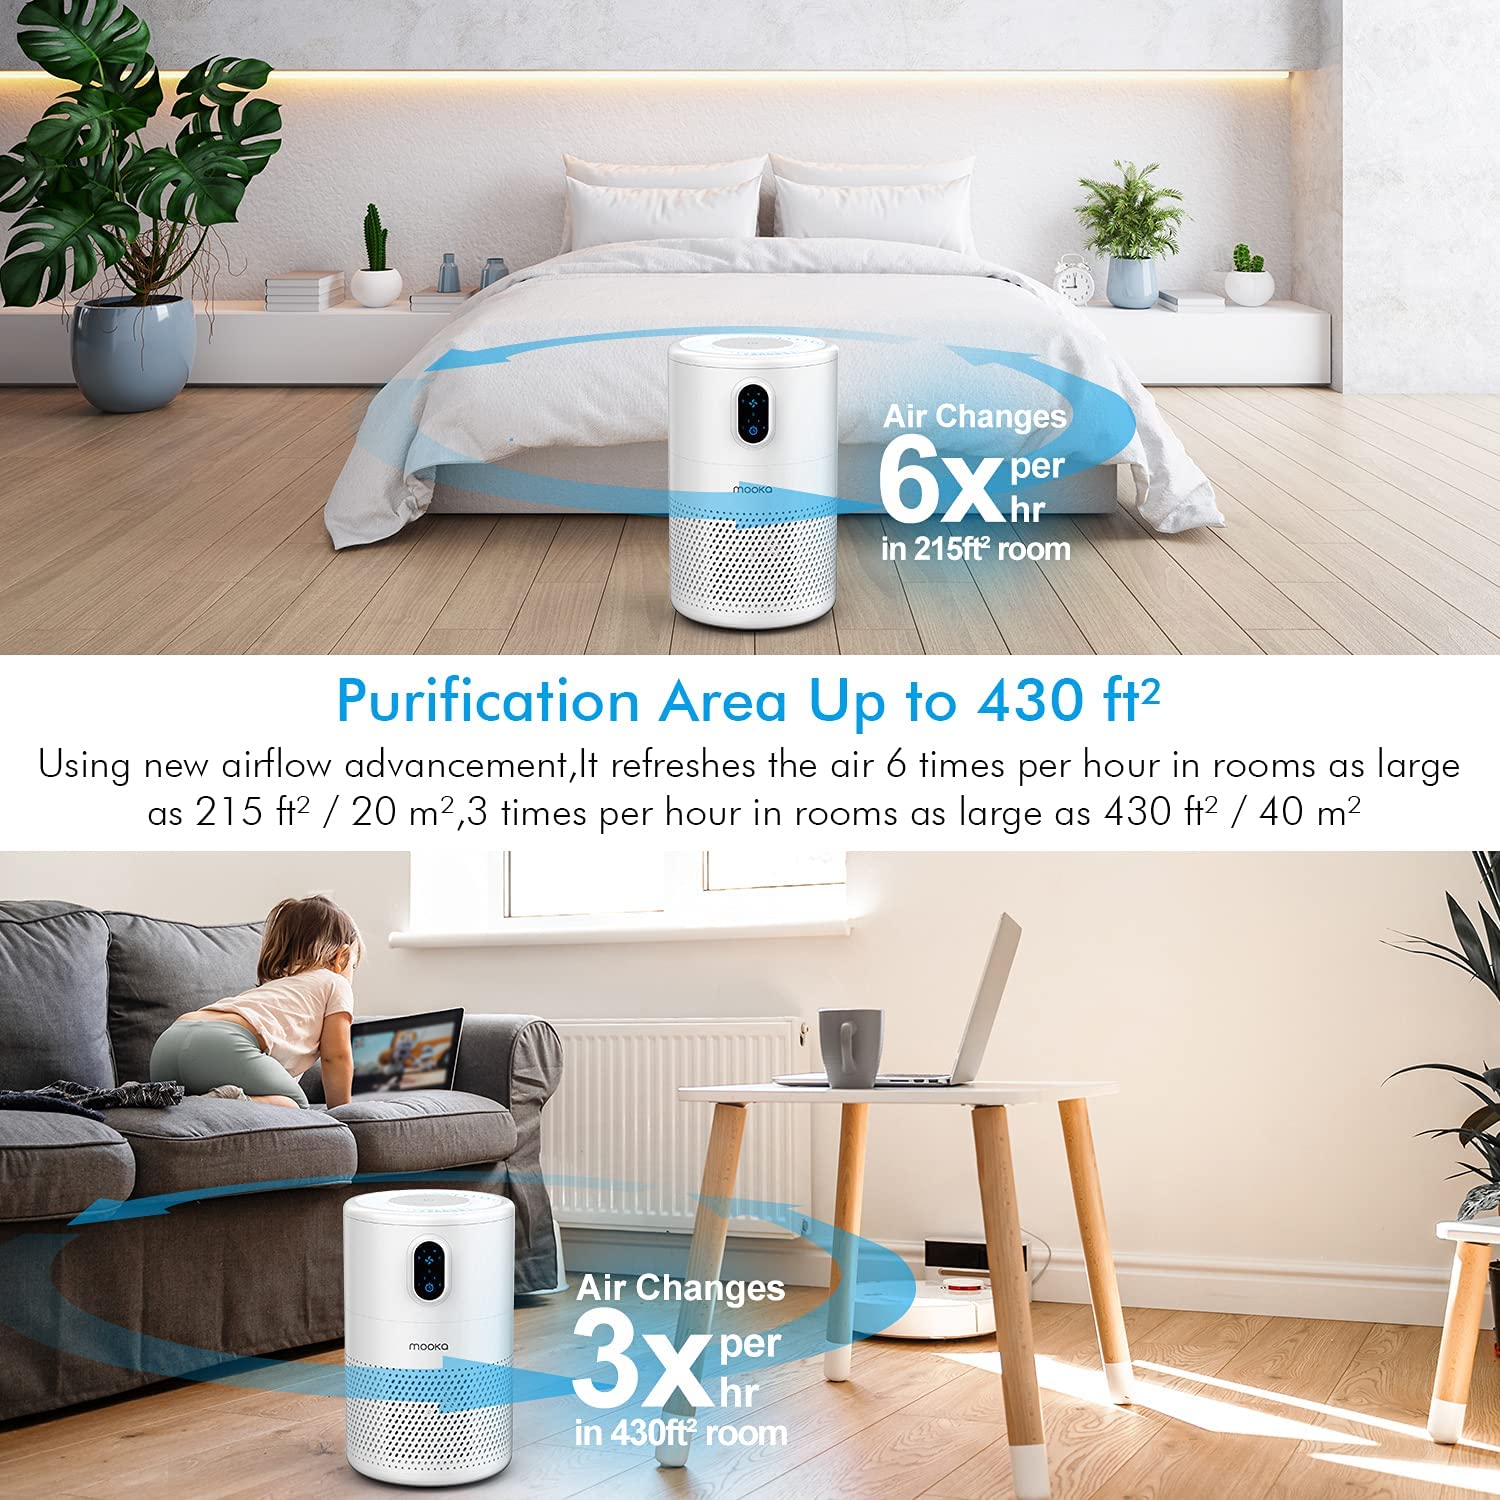 Levoit Air Purifiers for Home Bedroom H13 True HEPA Filter for Large Room, Sleep, Quiet Cleaner for Dust, Allergies, Pets, Smoke, White Noise, Smart